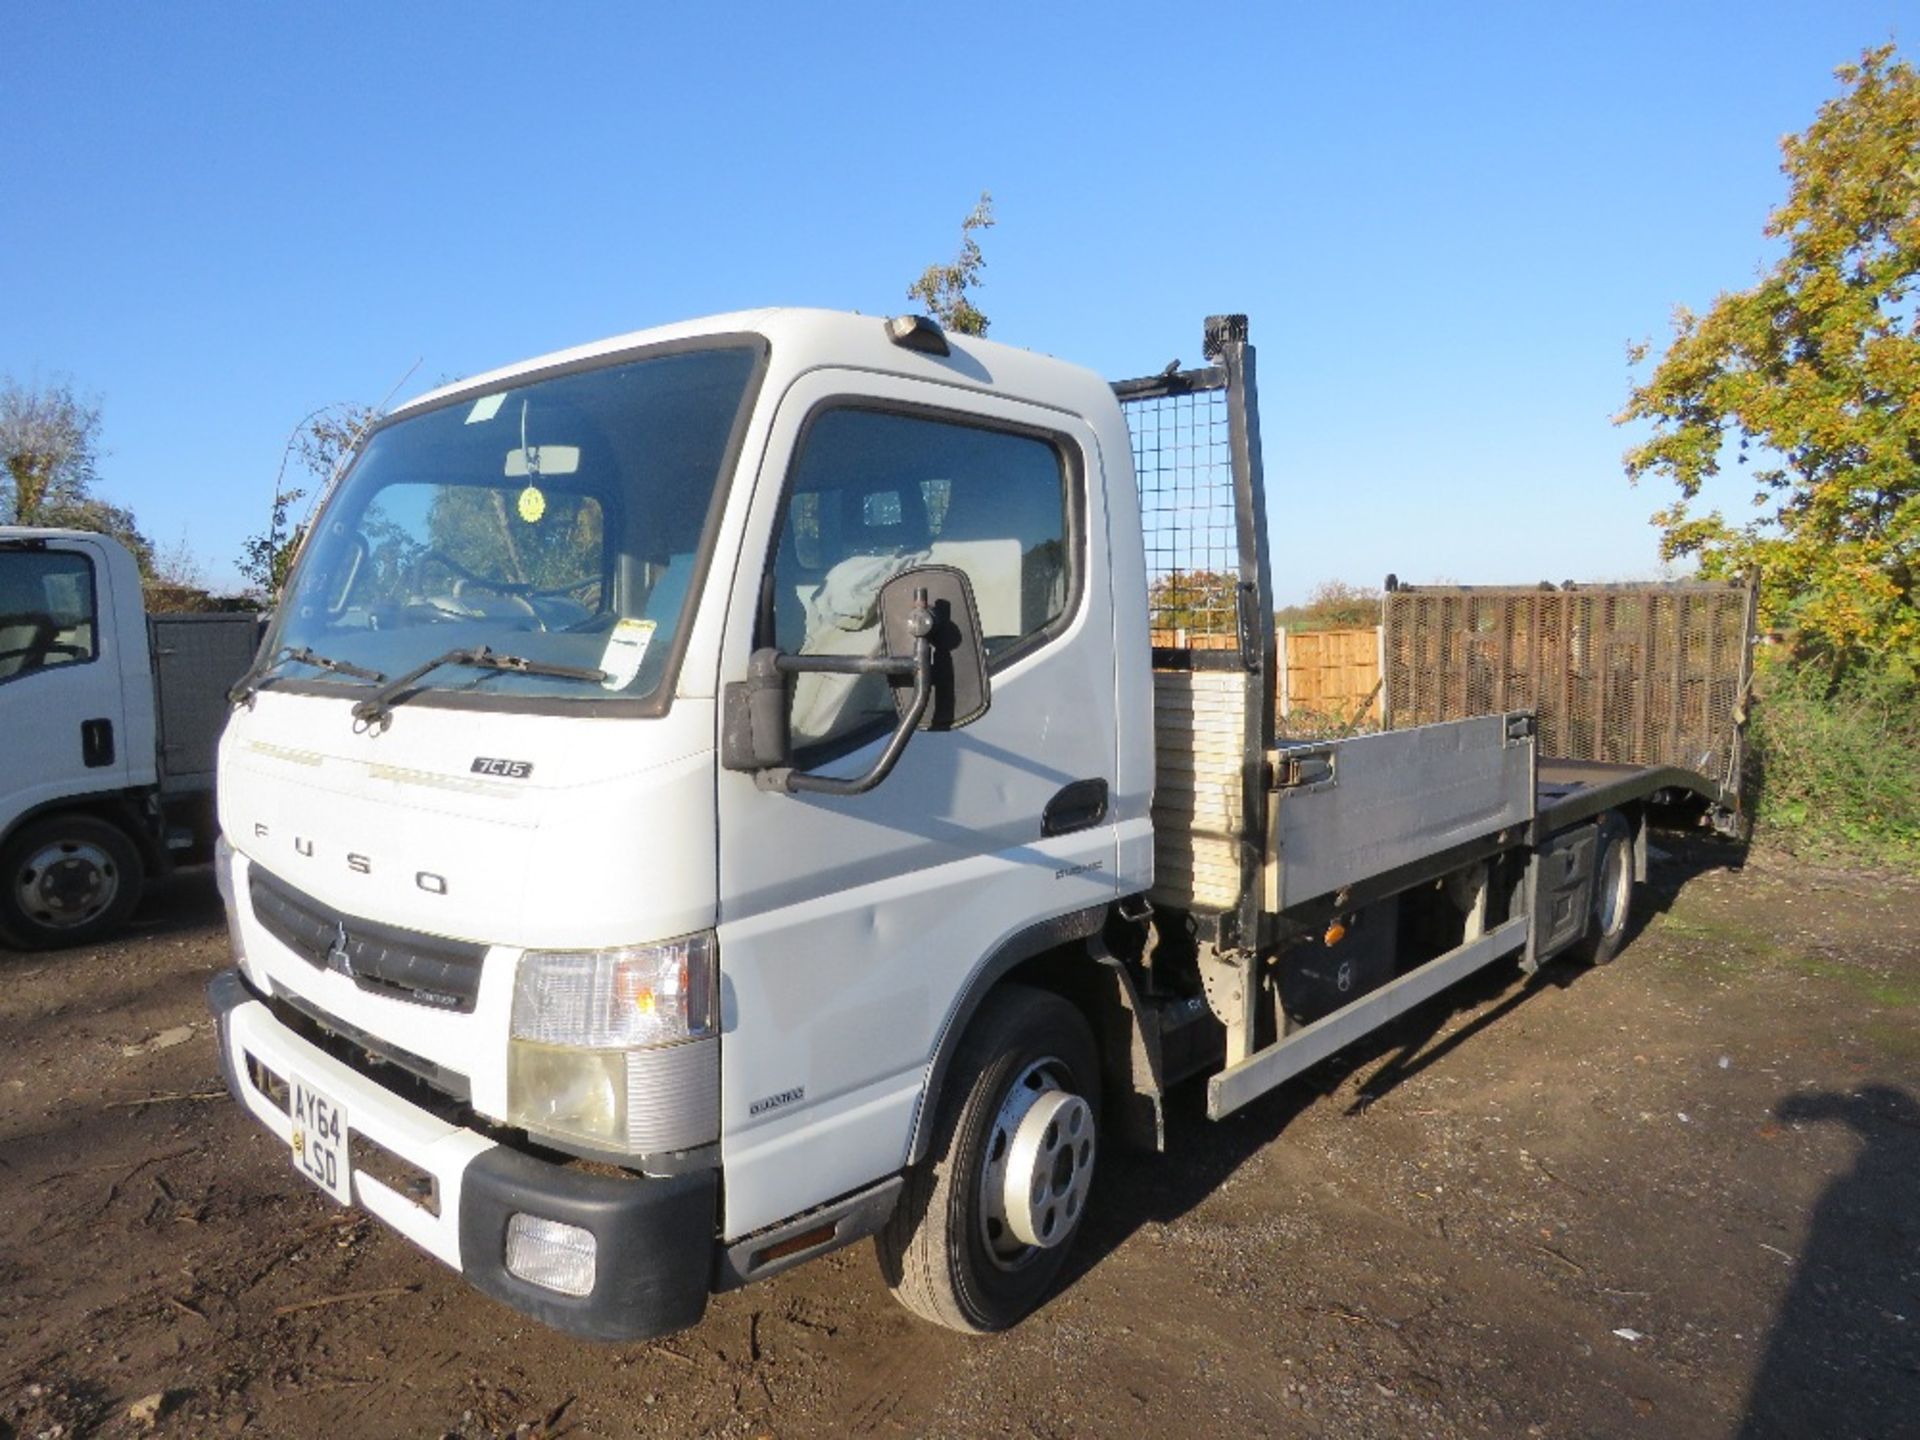 MITSUBISHI FUSO AUTOMATIC BEAVERTAIL PLANT LORRY REG: AY64 LSD. FIRST REGISTERED 25/09/14. WITH FUL - Image 3 of 12